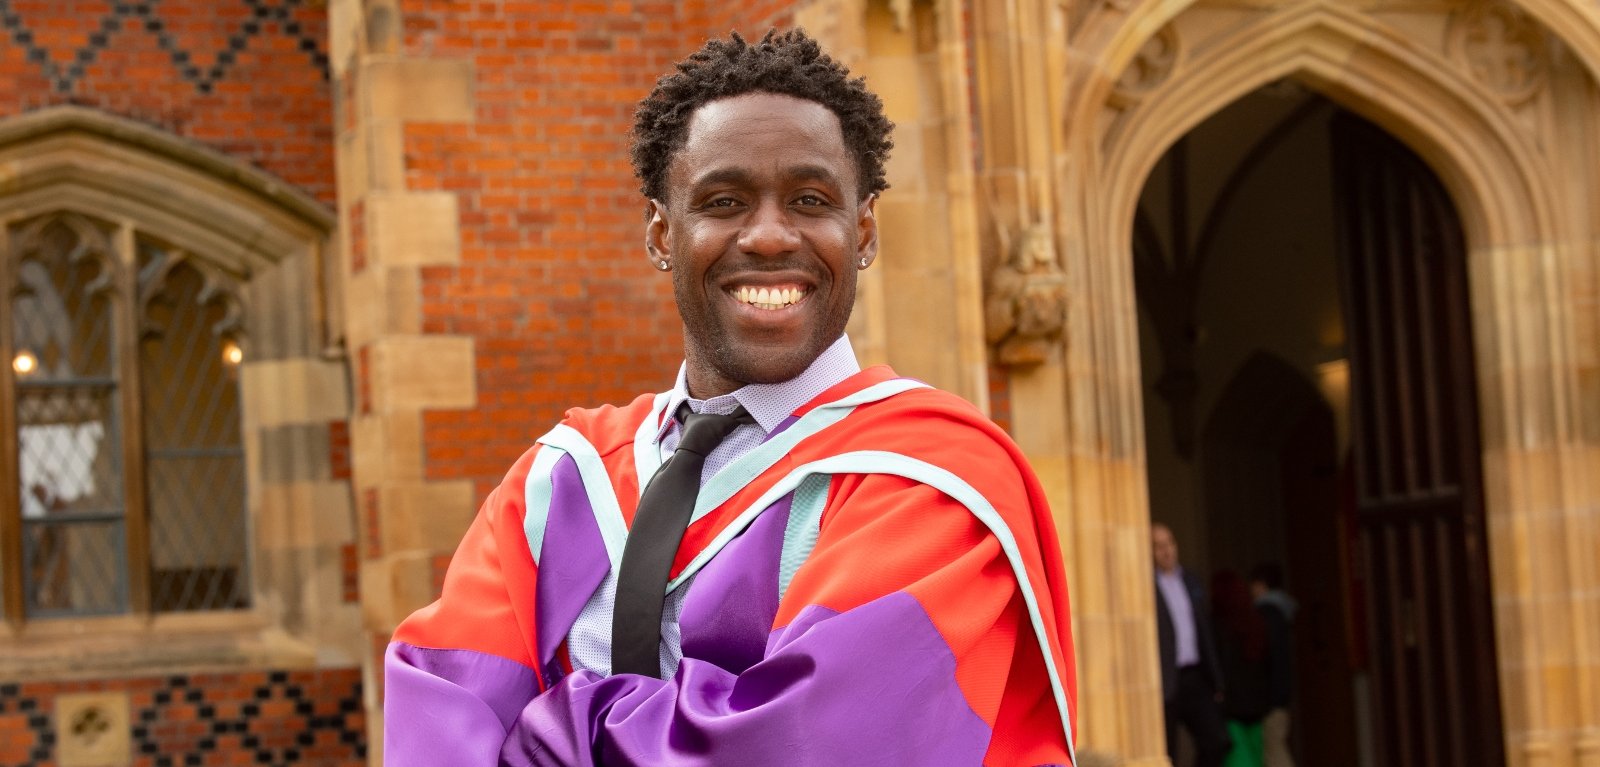 Star international student overcomes adversity to graduate with PhD